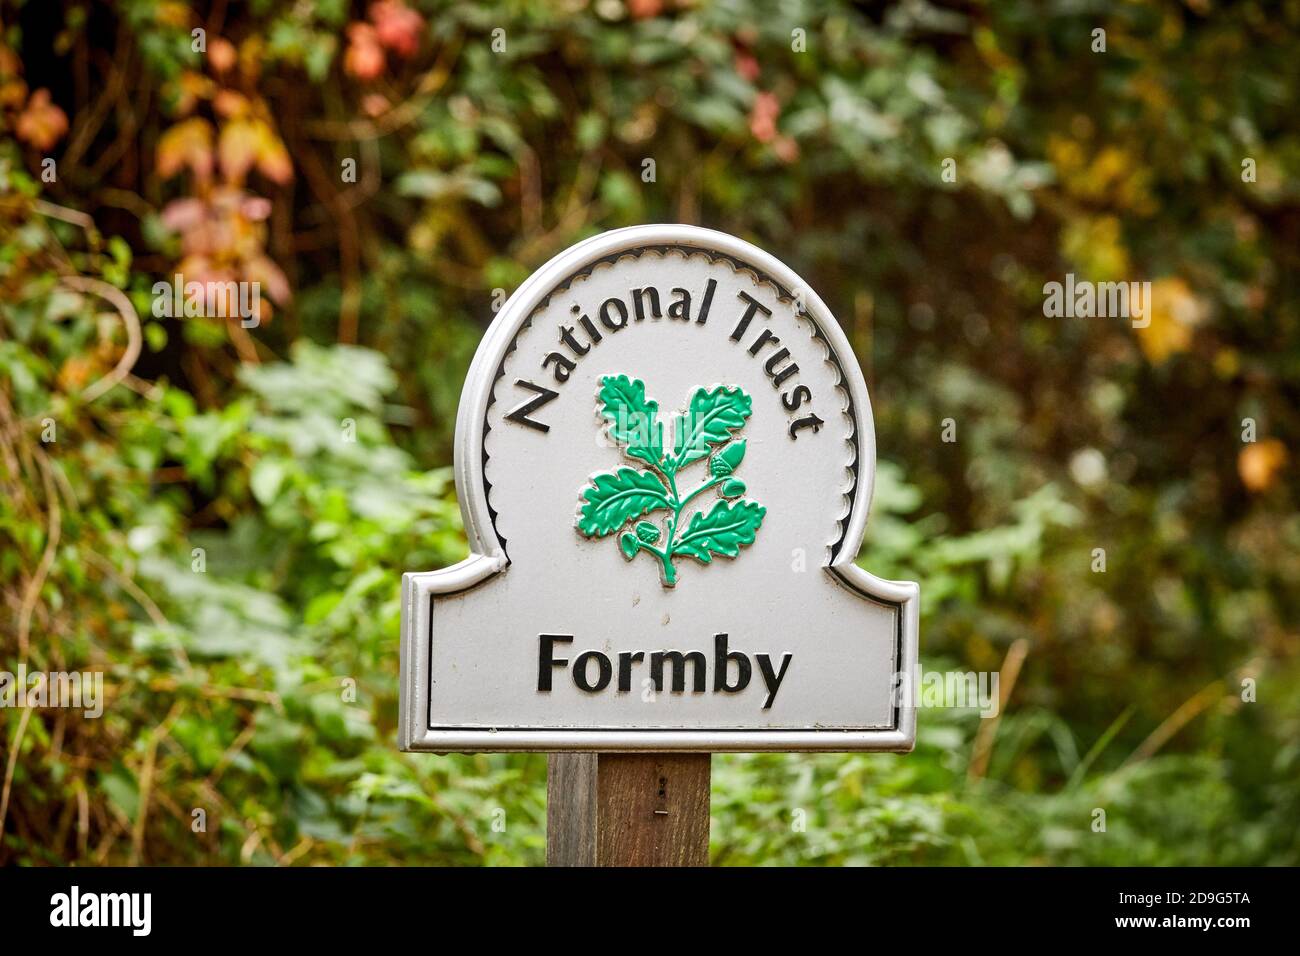 Formby Merseyside, England.  National trust wood and beach front Stock Photo